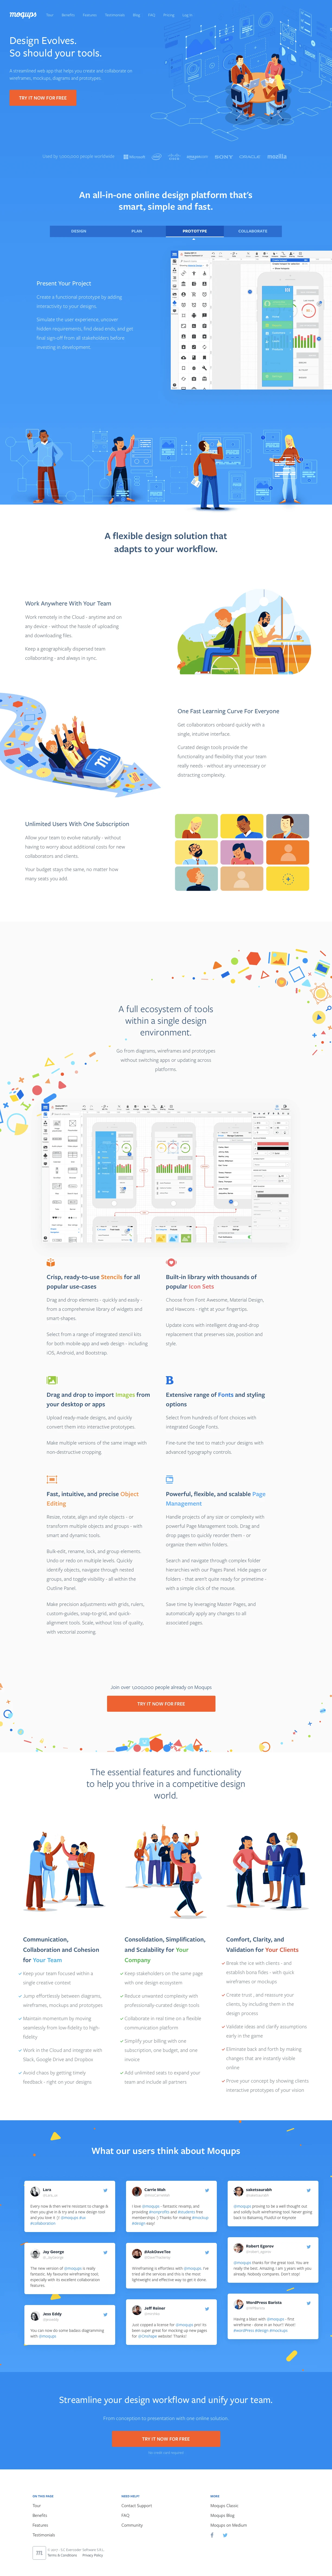 Moqups Landing Page Example: A streamlined web app that helps you create and collaborate on wireframes, mockups, diagrams and prototypes.